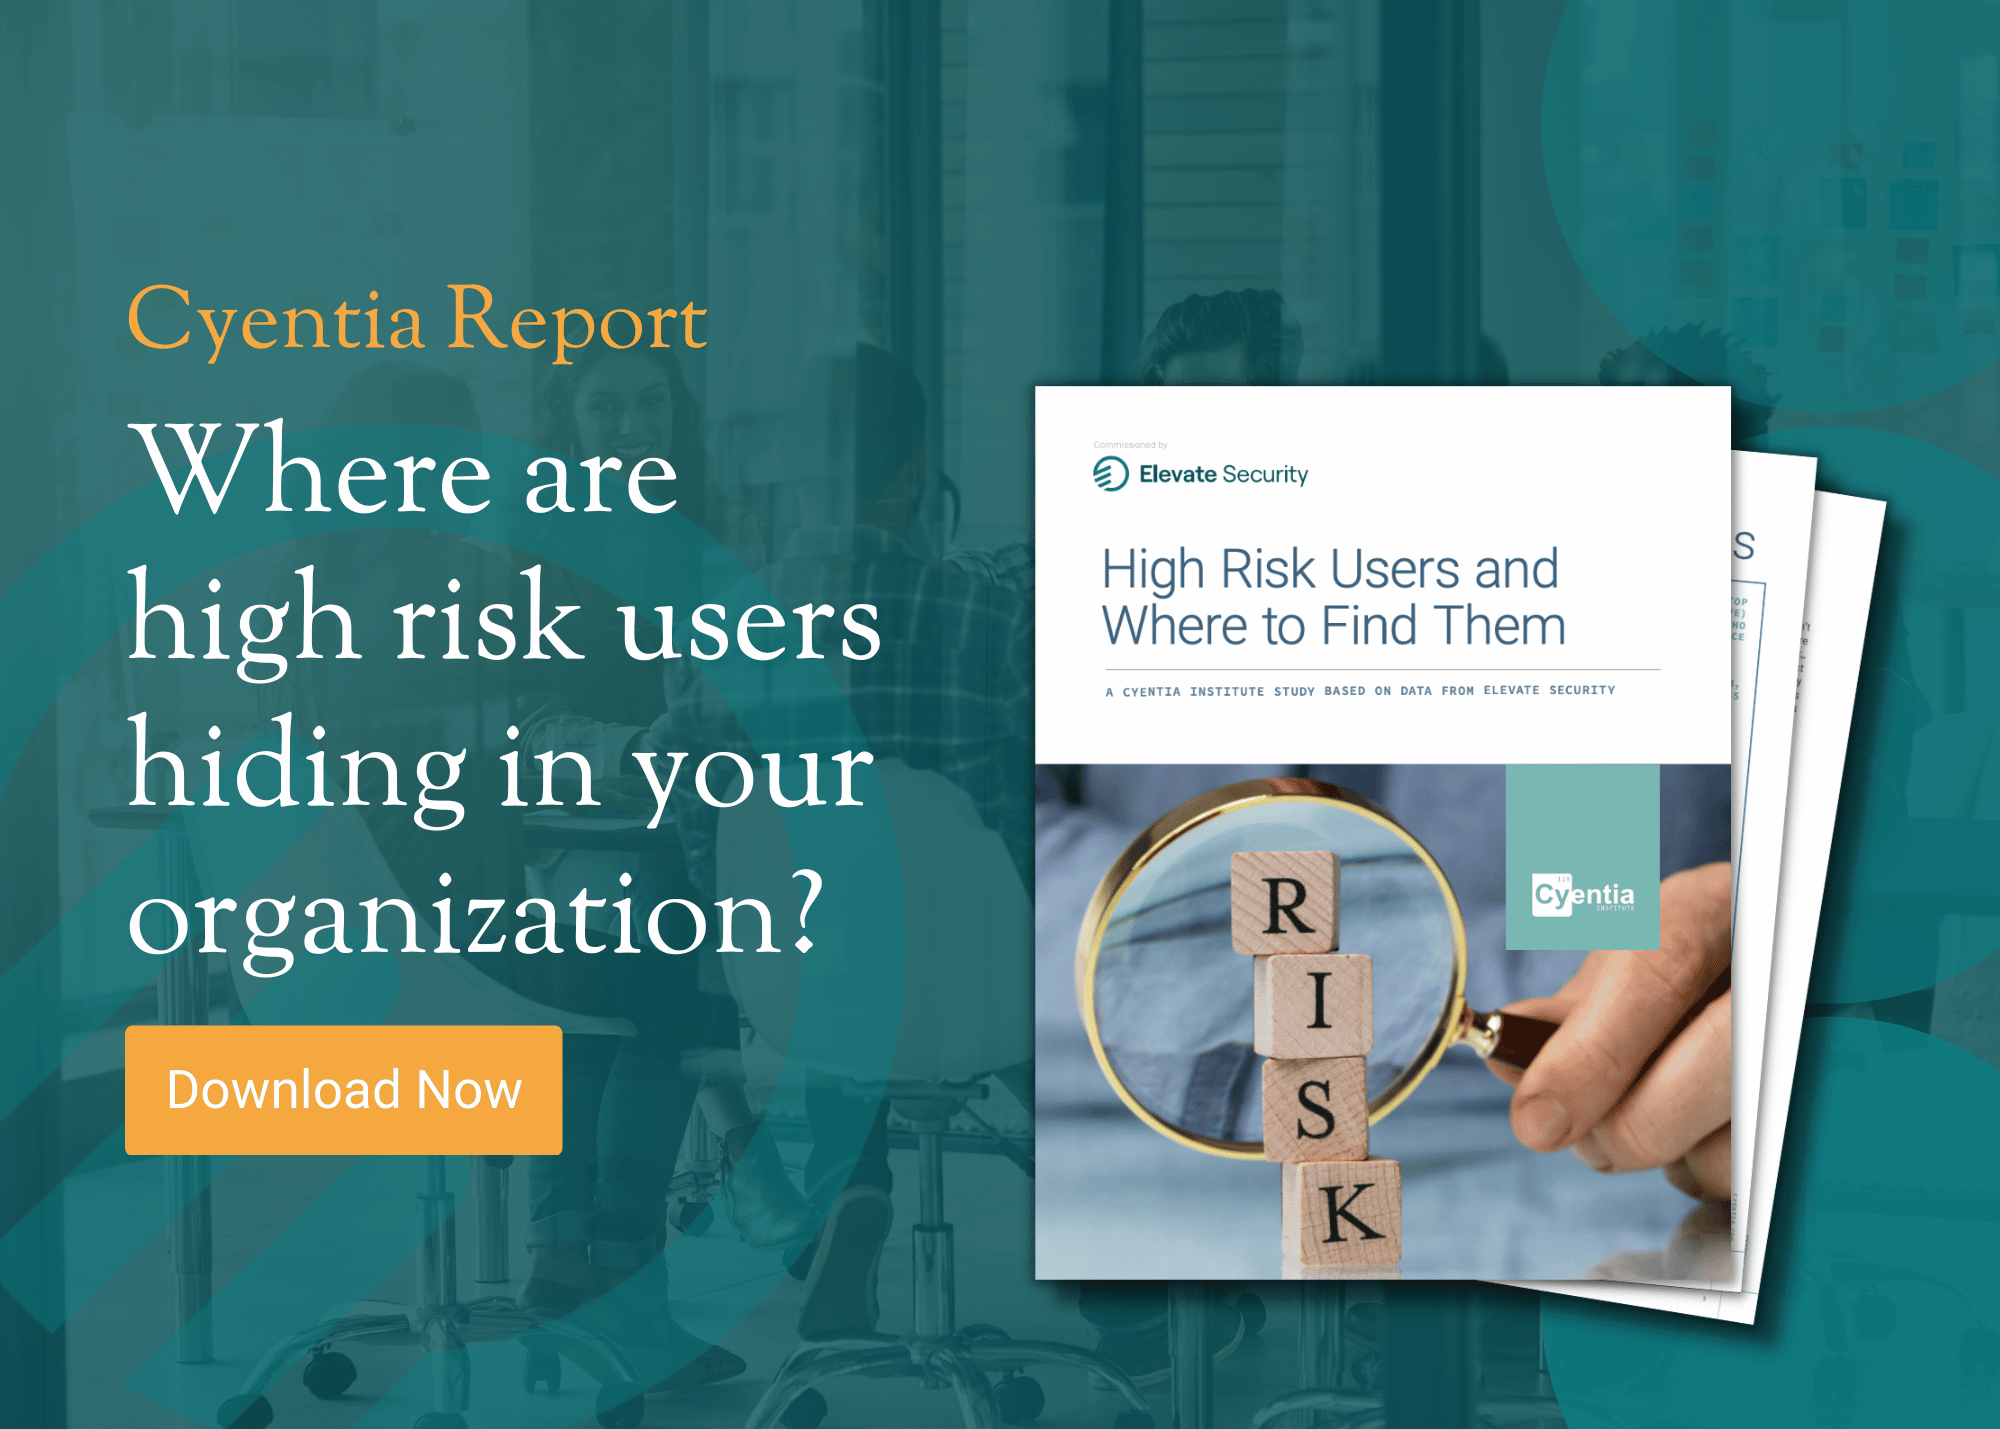 With nearly 8 years' worth of data from Elevate Security, the latest Cyentia Report focuses on what makes users high risk and where you can find them.